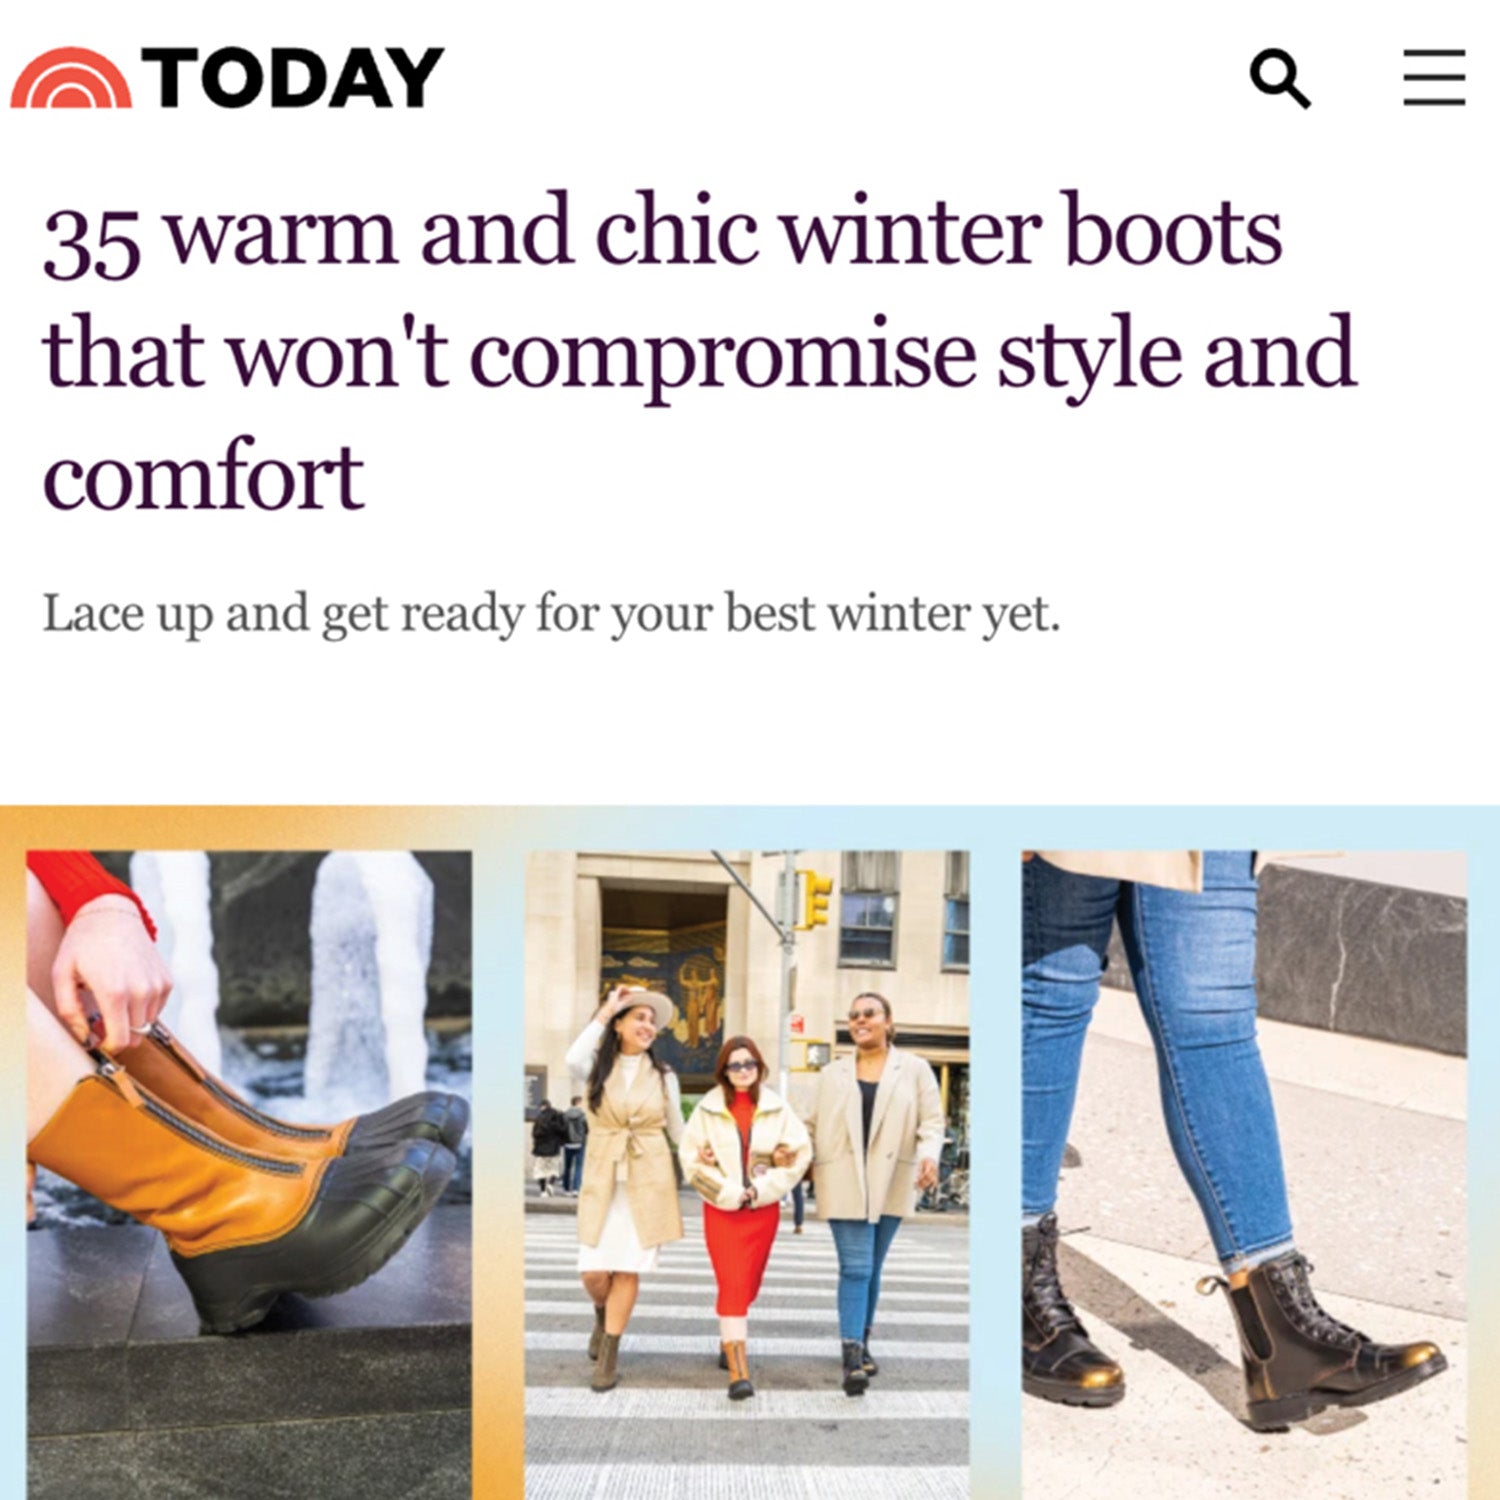 Today News Article - Warm and Chic Winter Boots